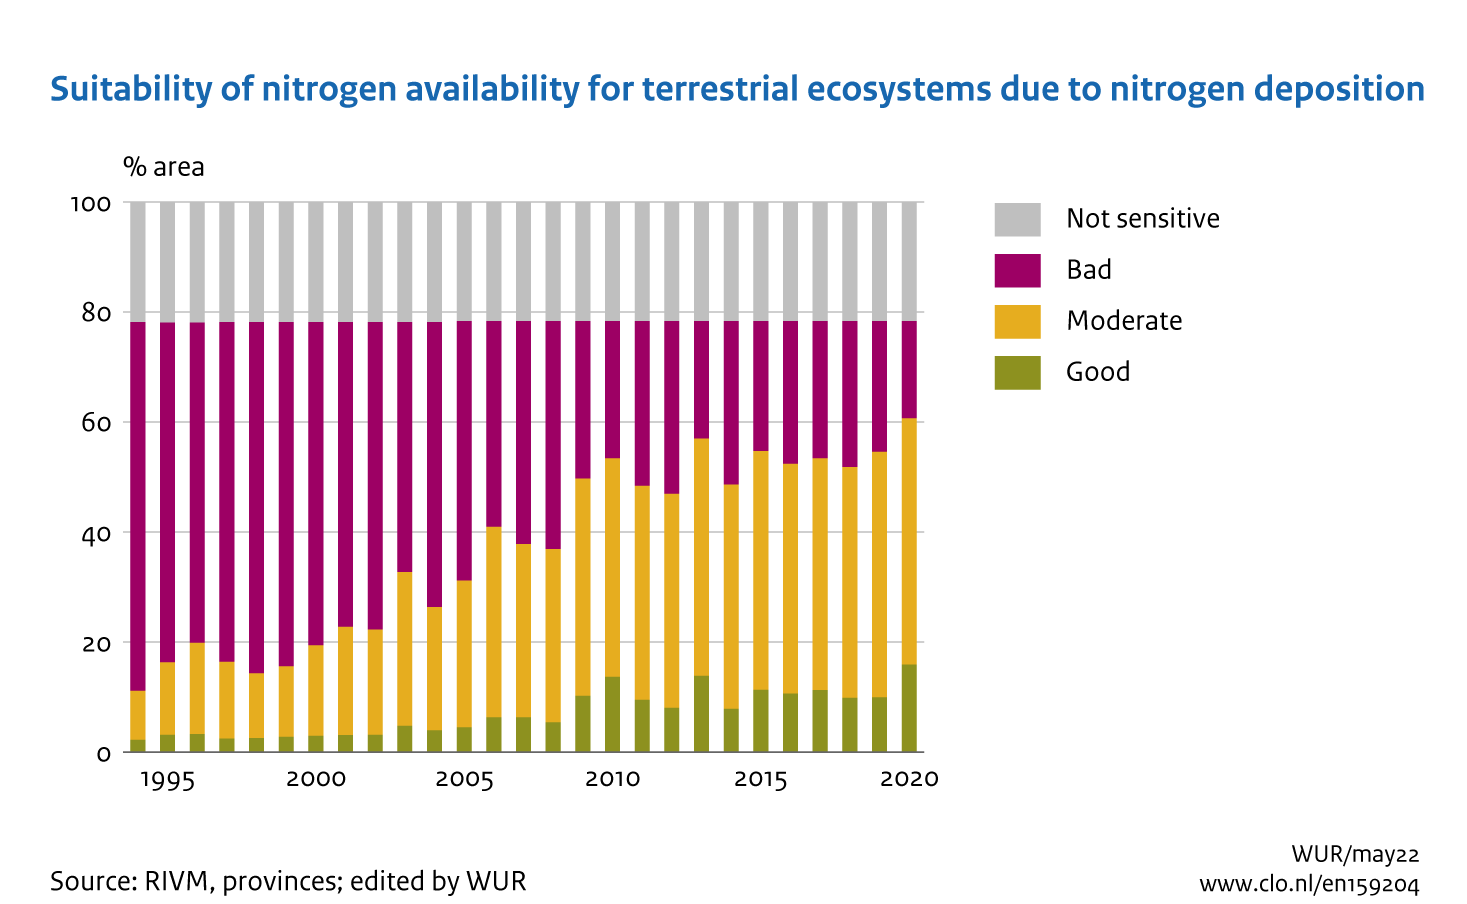 Image Suitability of nitrogen availability in terrestrial ecosystems due to nitrogen deposition. The image is further explained in the text.